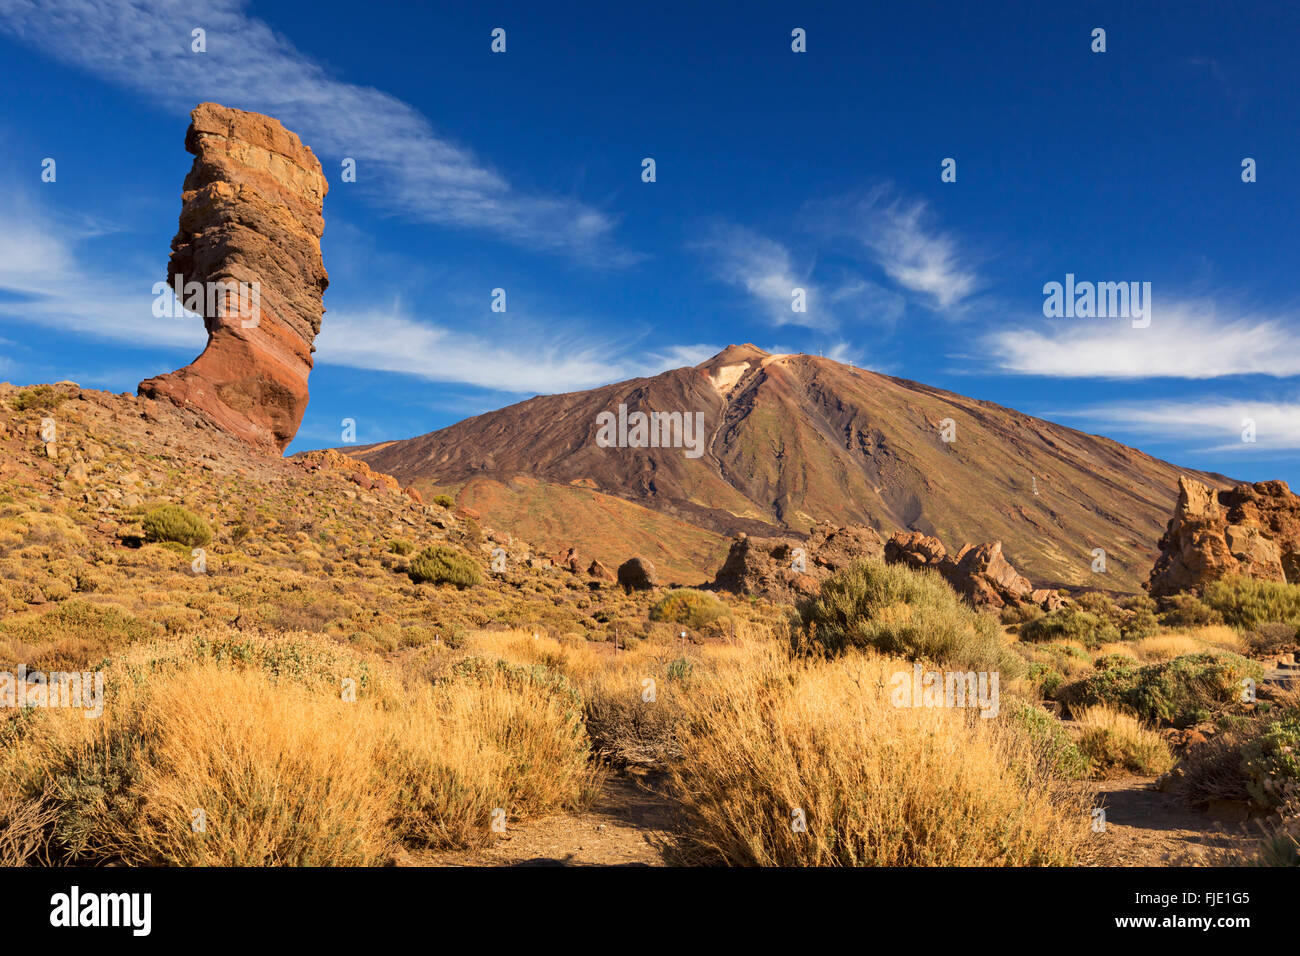 Rock formations at Roques de Garcia in the Teide National Park on Tenerife, Canary Islands, Spain. Photographed on a sunny morni Stock Photo